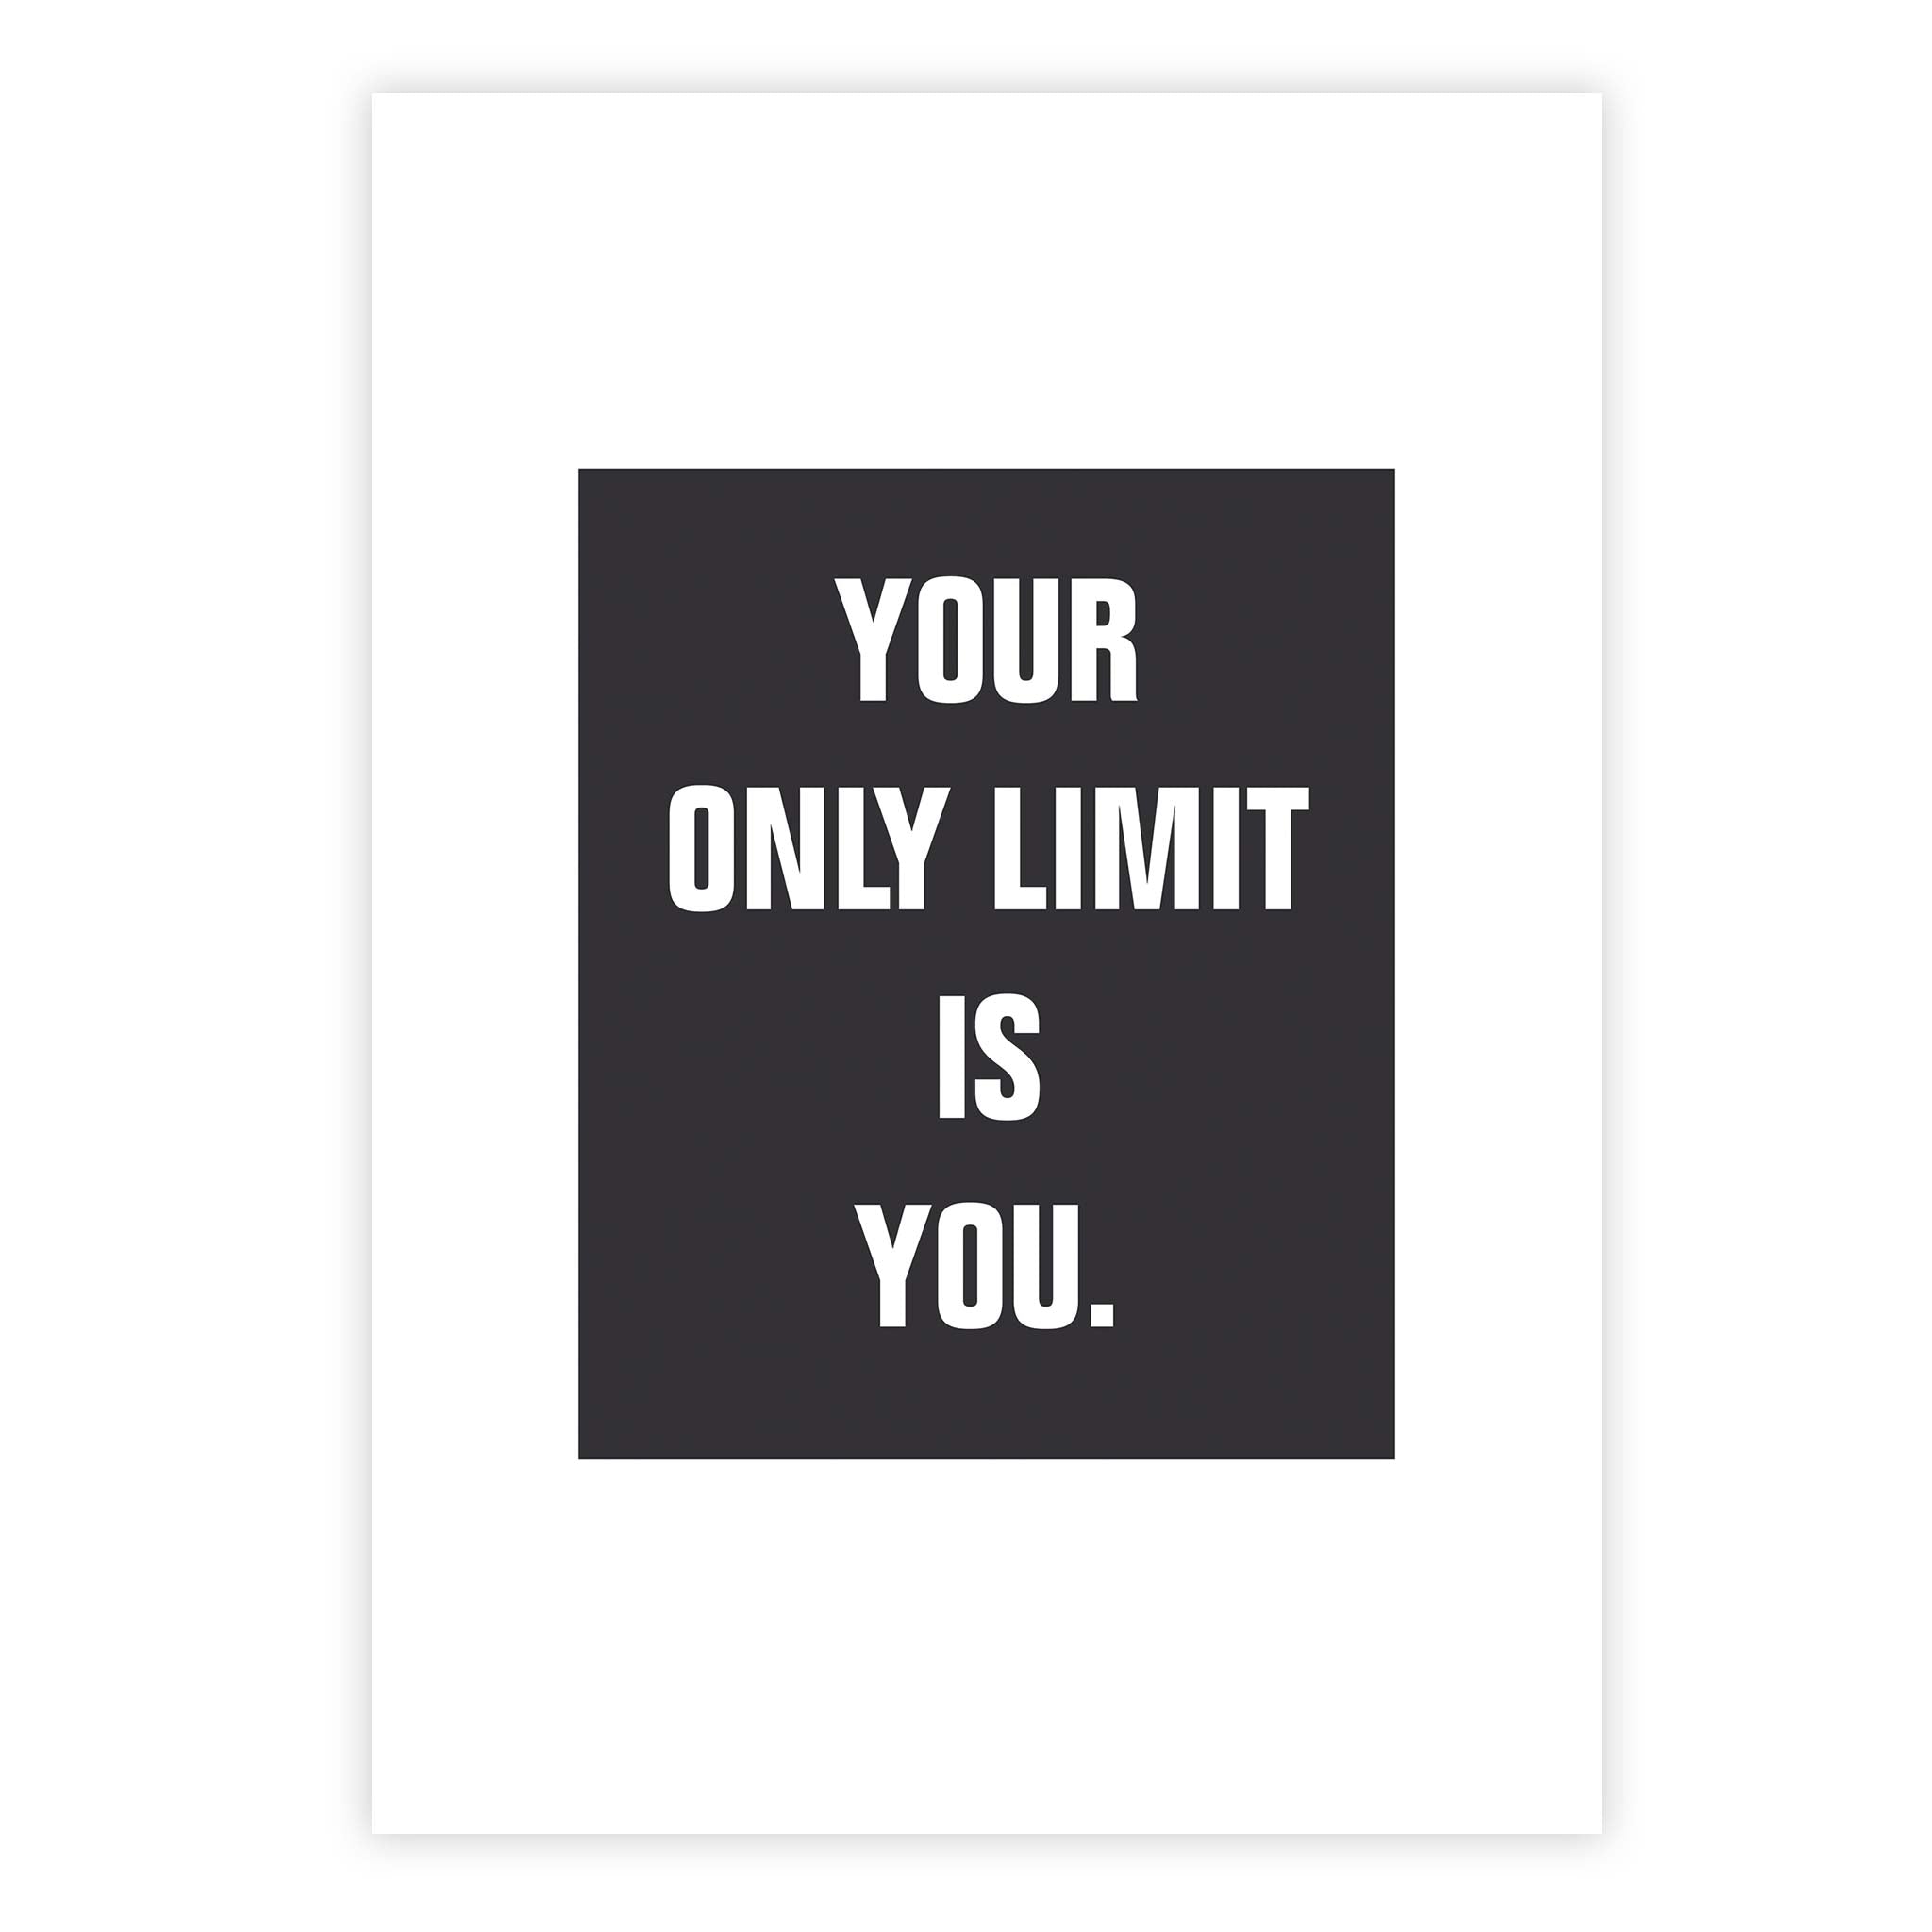 Your only limit is you